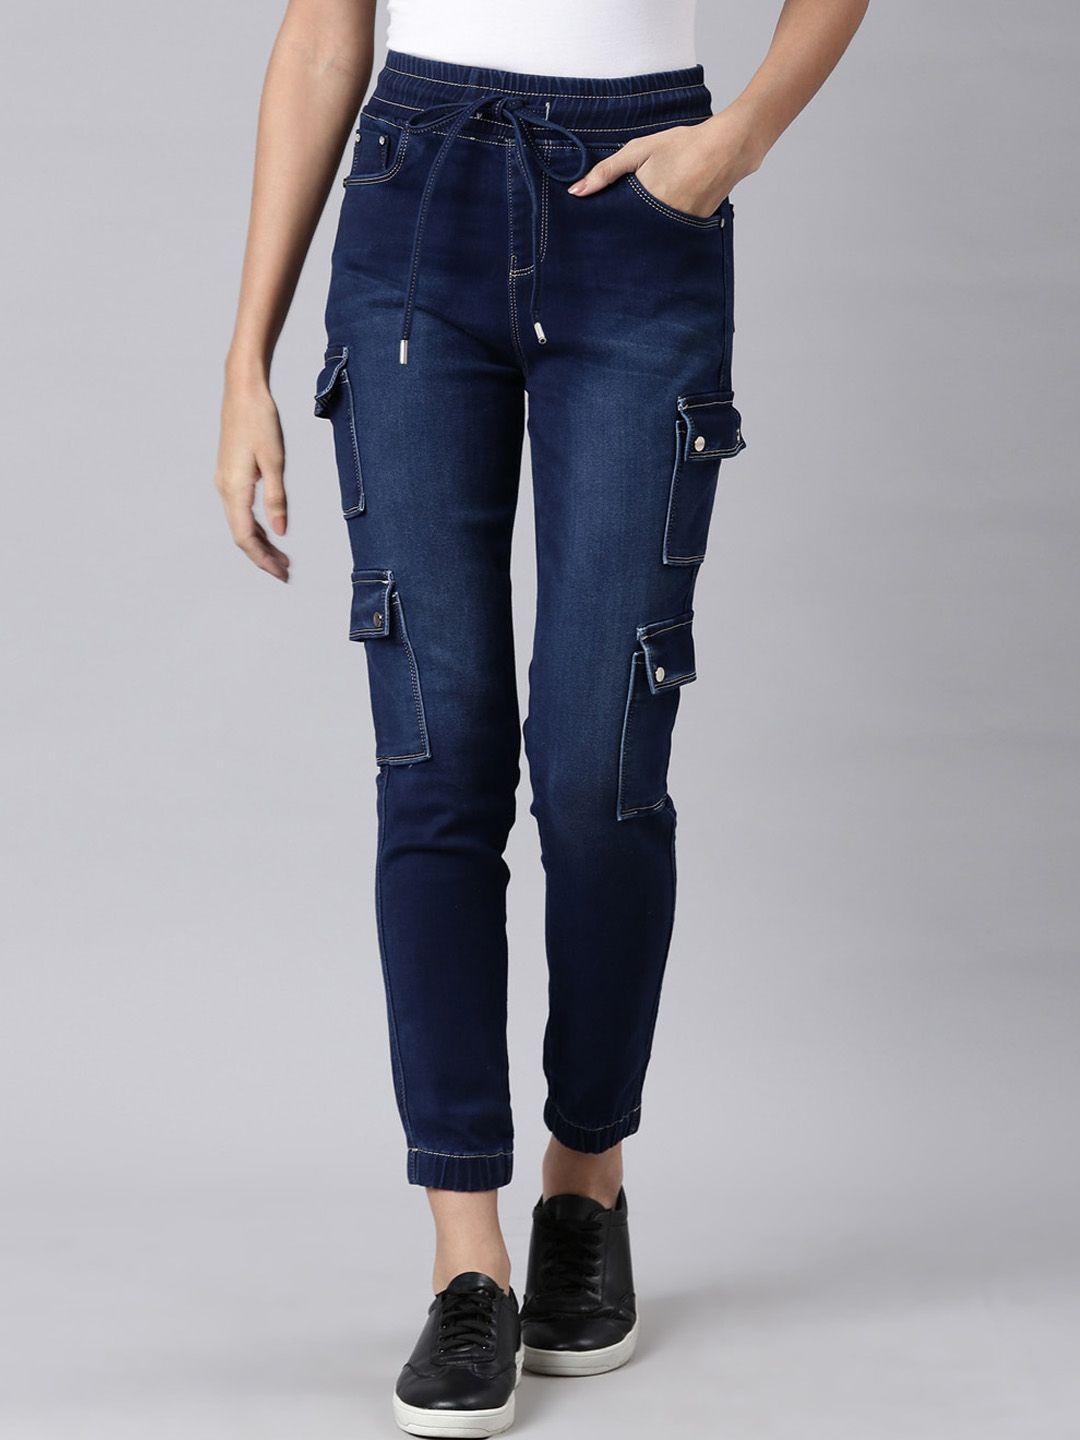 showoff-women-jean-jogger-mid-rise-light-fade-acid-wash-stretchable-cropped-jeans